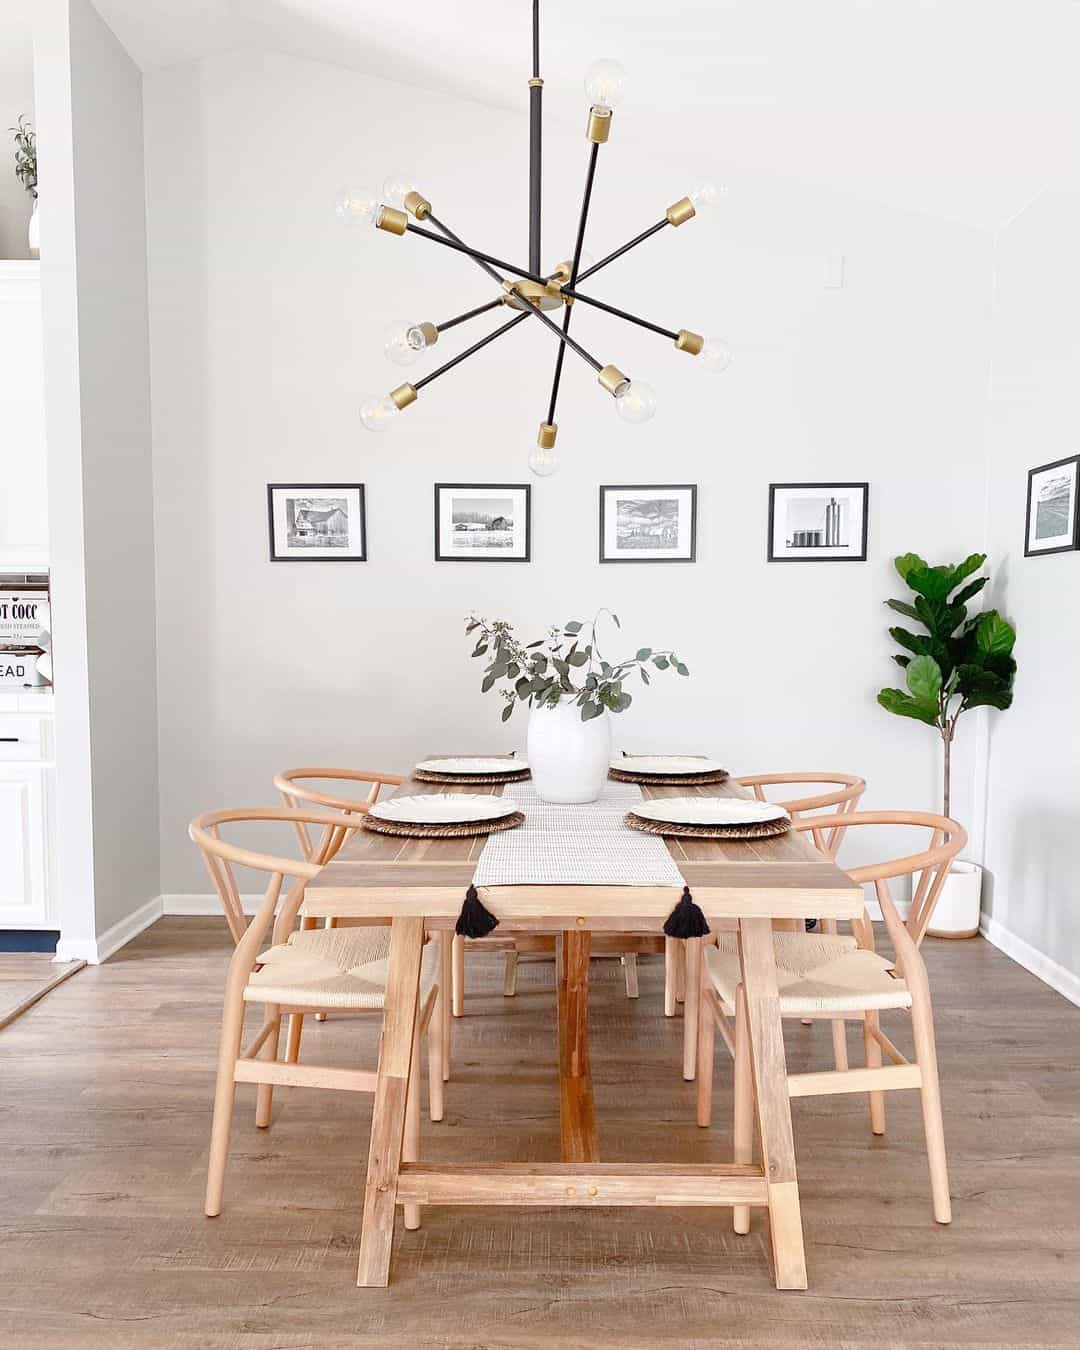 Modern Farmhouse Dining Room With Sawhorse Table - Soul & Lane